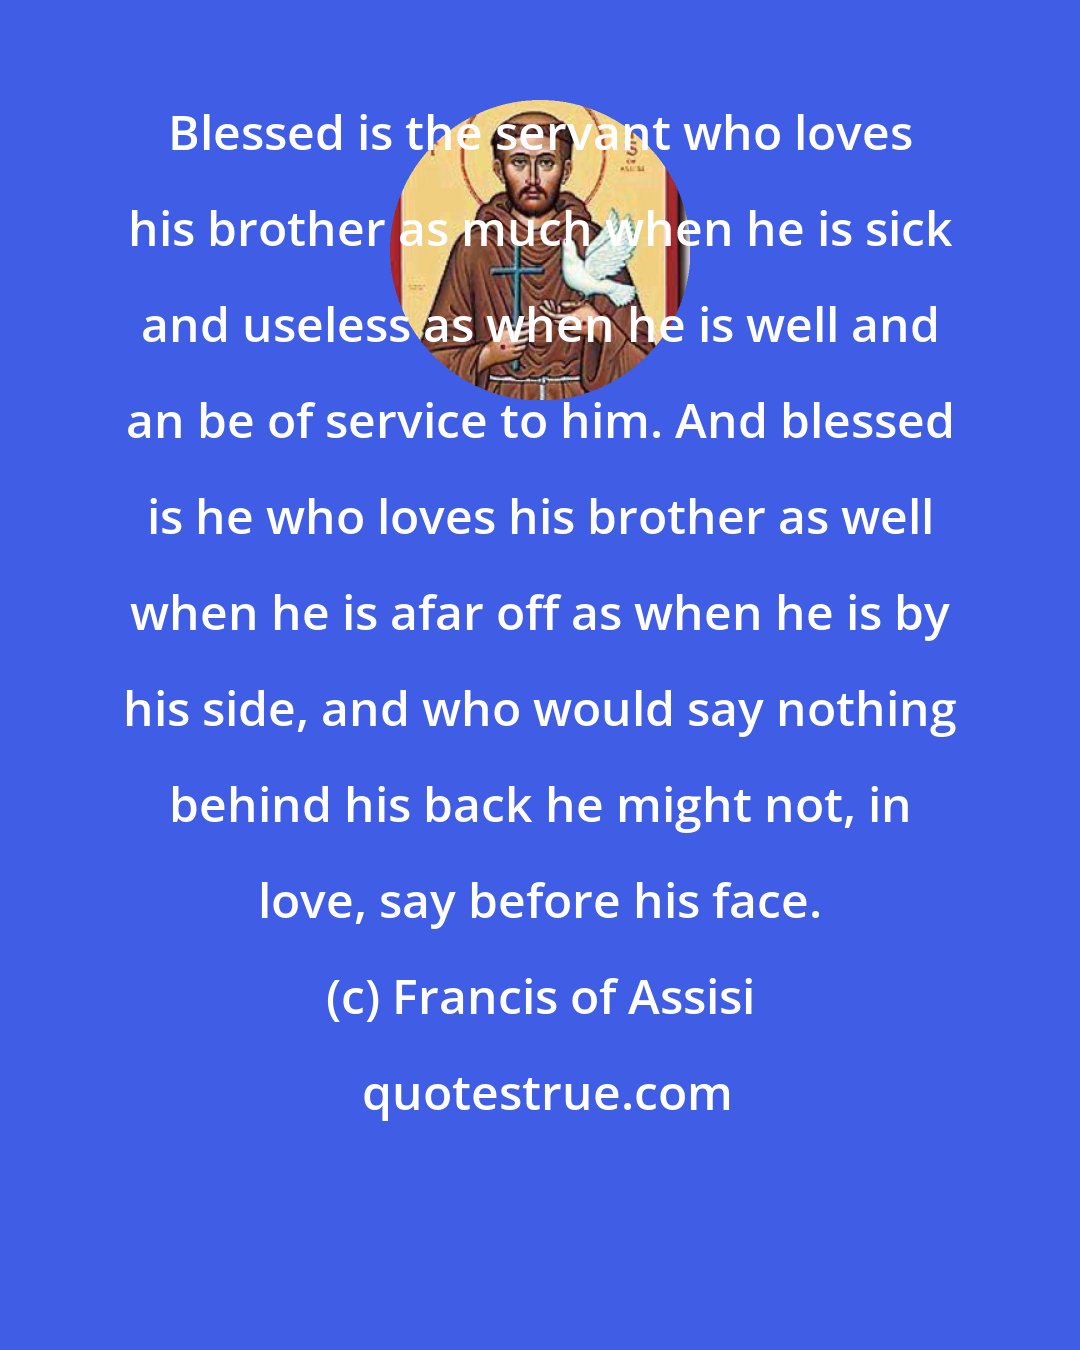 Francis of Assisi: Blessed is the servant who loves his brother as much when he is sick and useless as when he is well and an be of service to him. And blessed is he who loves his brother as well when he is afar off as when he is by his side, and who would say nothing behind his back he might not, in love, say before his face.